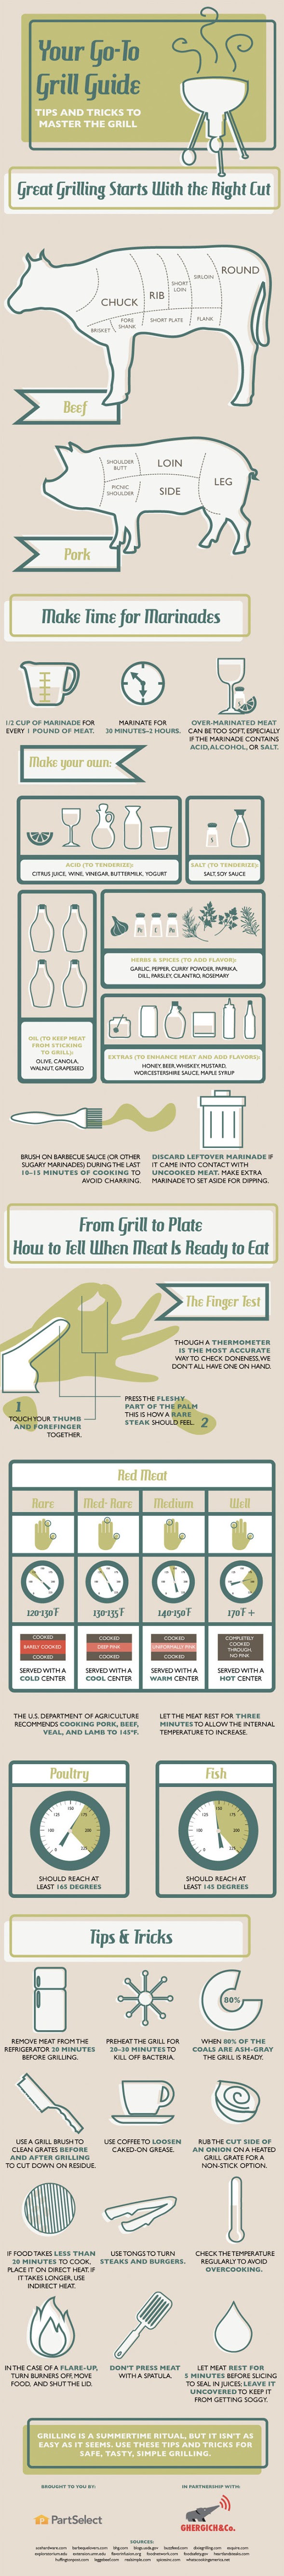 Your Go-to Grill Guide #infographic